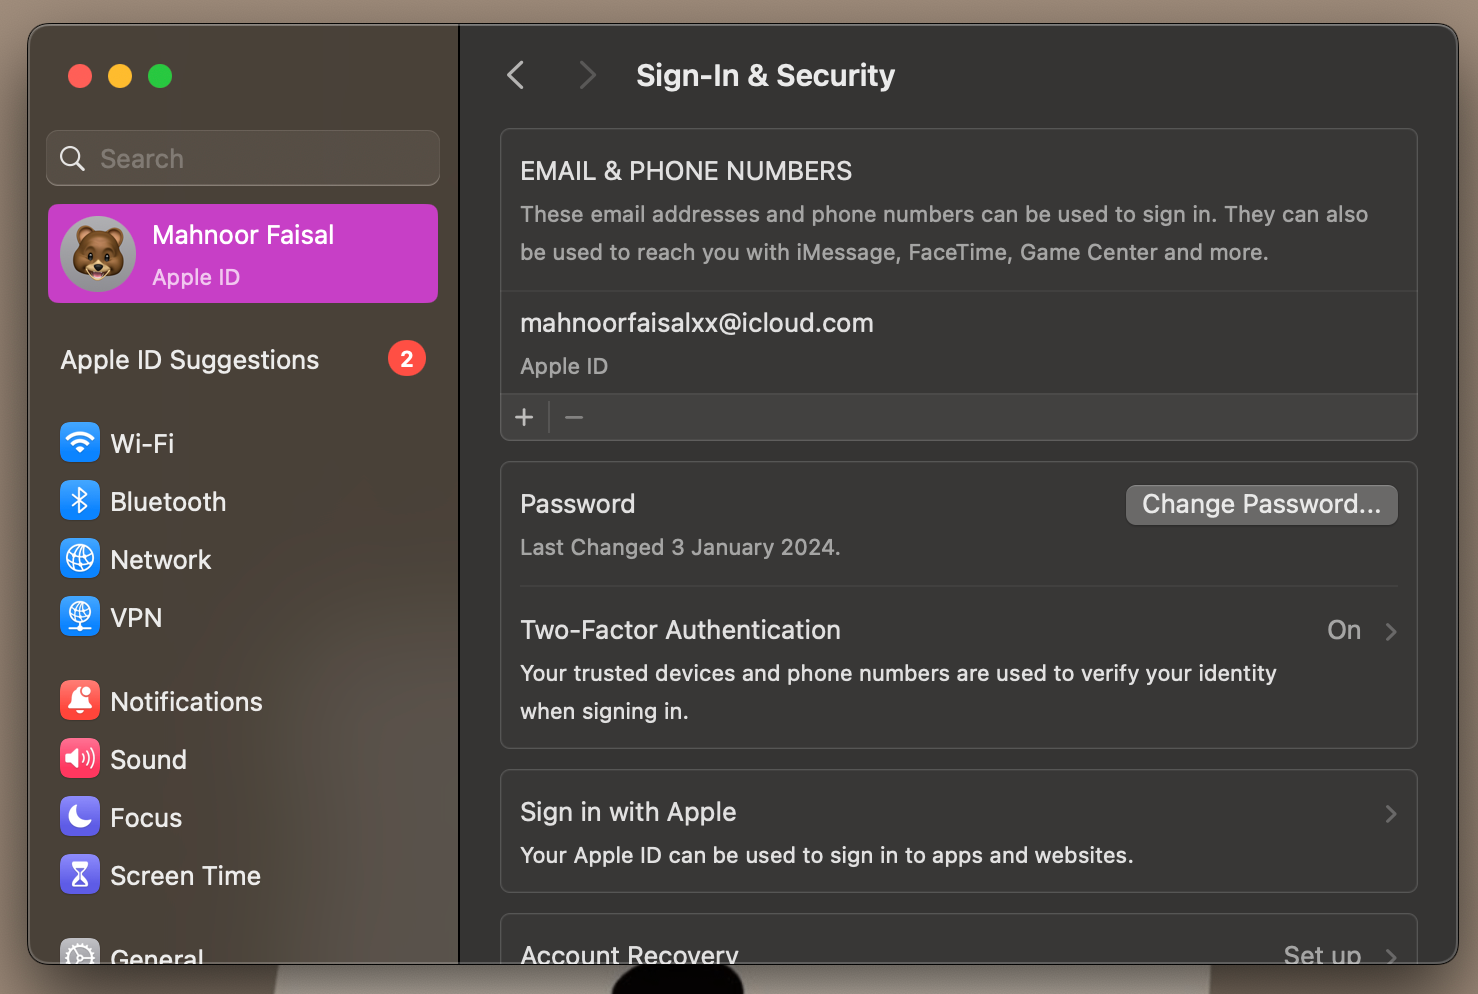 Sign-In & Security settings